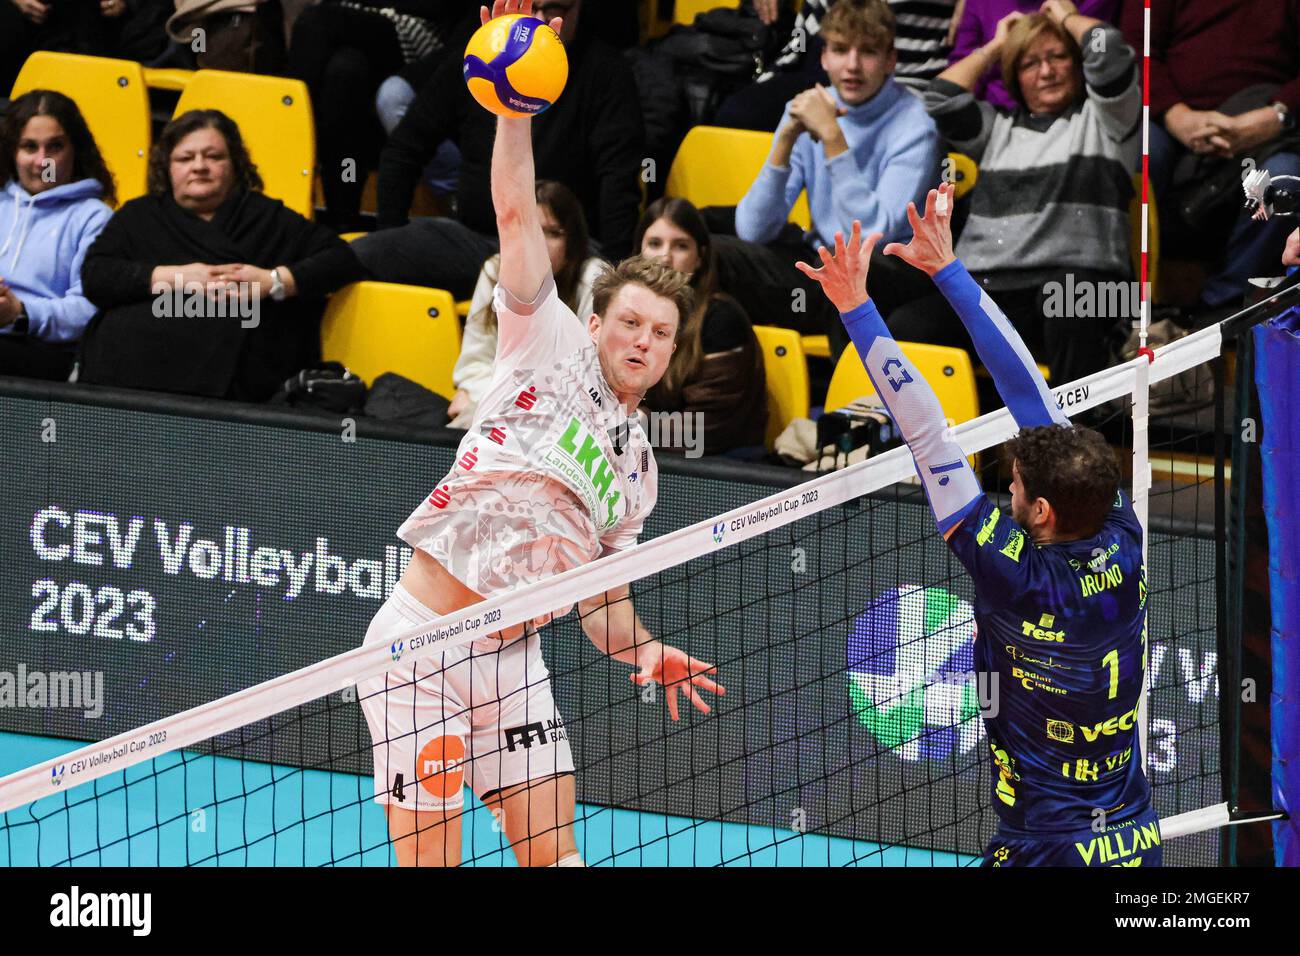 Modena, Italy. 25th Jan, 2023. Jordan Malthe Ewert (SVG Luneburg) during Valsa Group Modena vs SVG Luneburg, Volleyball CEV Cup Men in Modena, Italy, January 25 2023 Credit: Independent Photo Agency/Alamy Live News Stock Photo